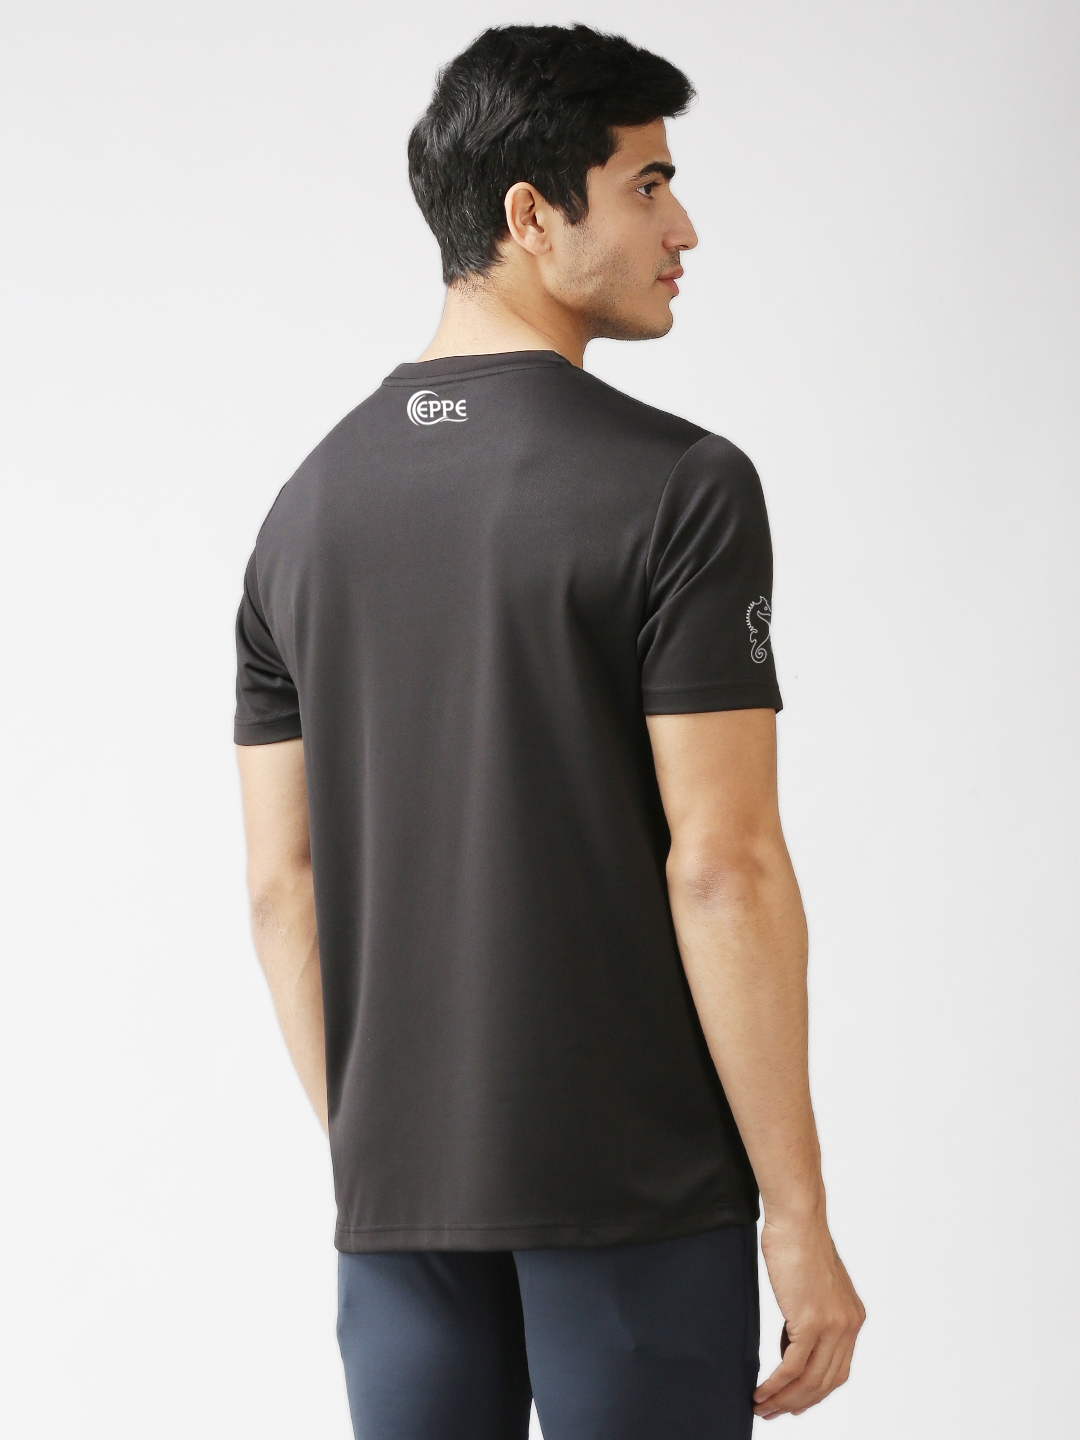 Eppe | EPPE Dryfit Micropolyester Tshirt for Men's Round Neck Half Sleeves Sports Casual - Black - Size-S(36) 4